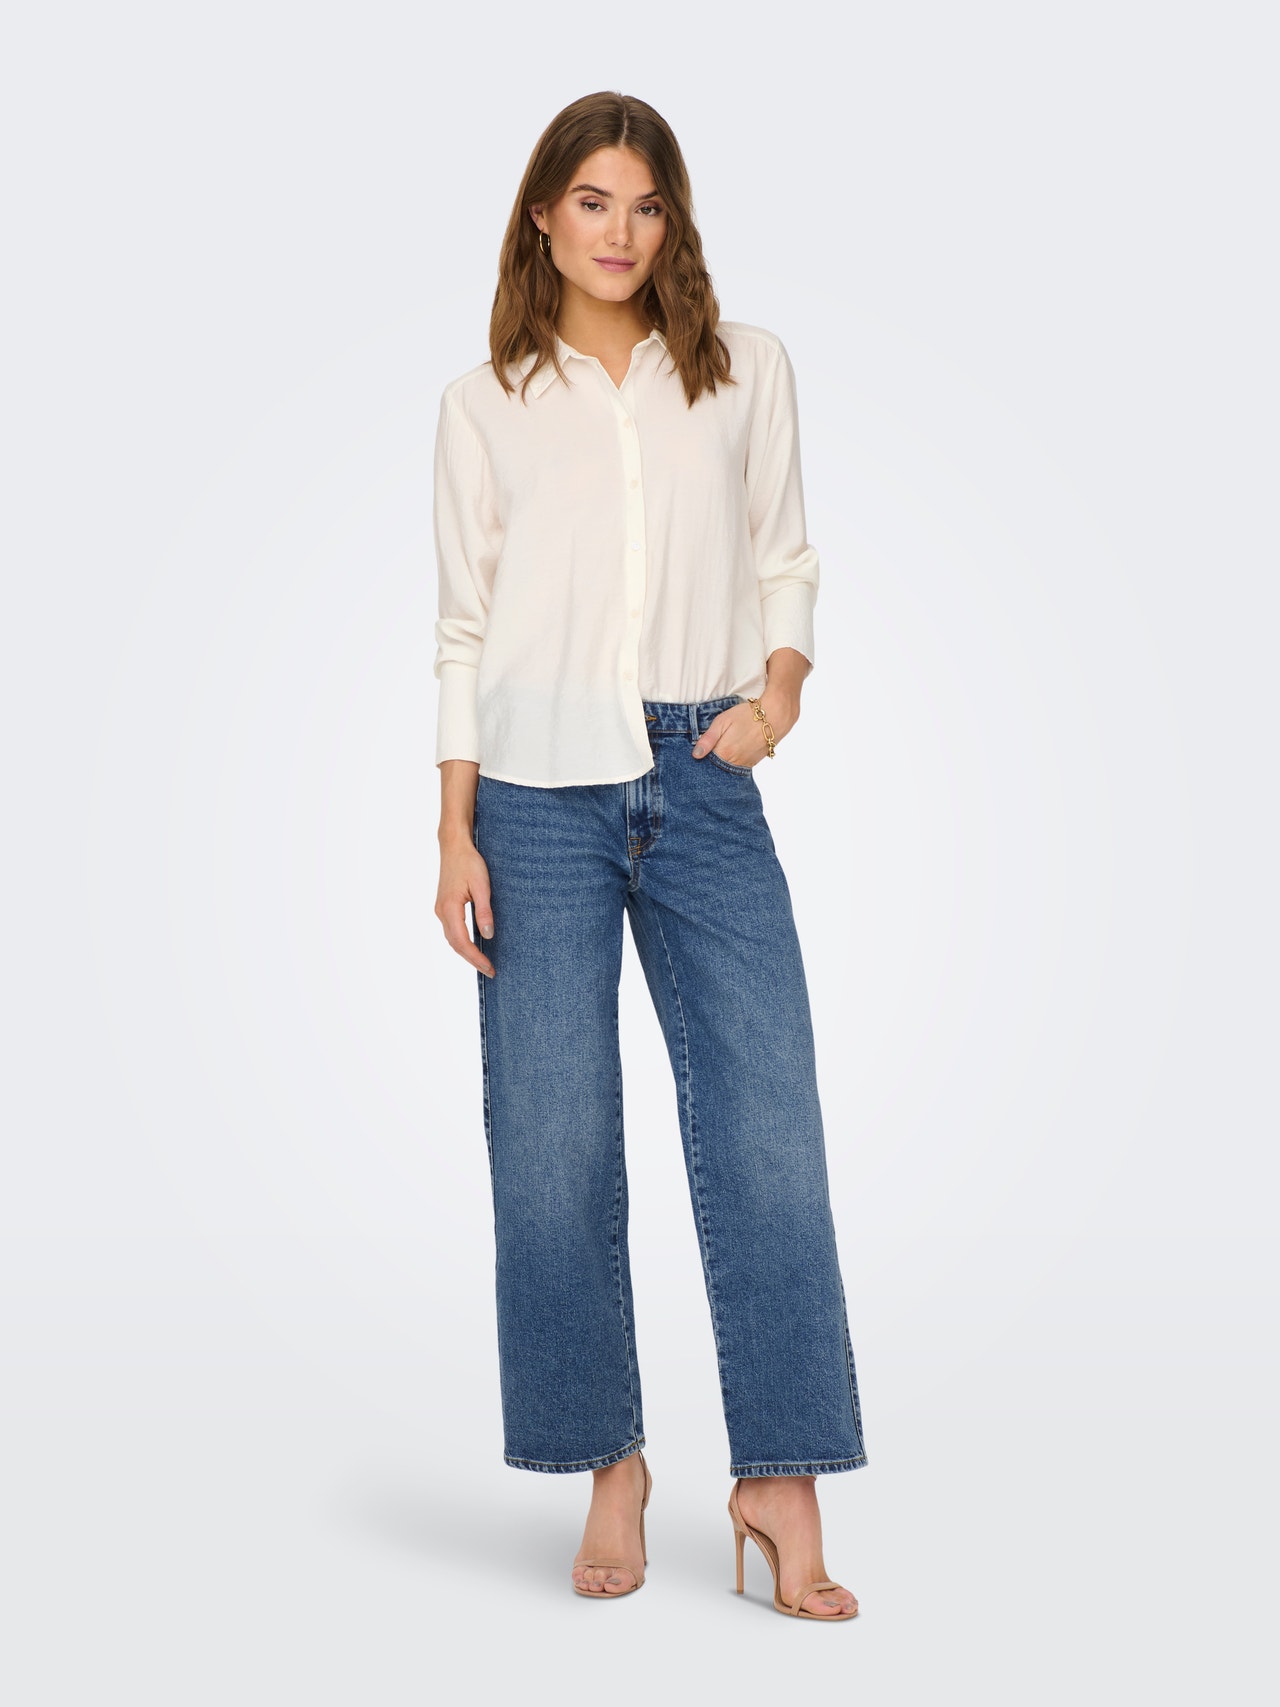 https://images.only.com/15230274/3627890/005/only-onlsophielifemwcroppedjeans-blue.jpg?v=df6051e6fefc353aea950621612bb421&format=webp&width=1280&quality=90&key=25-0-3